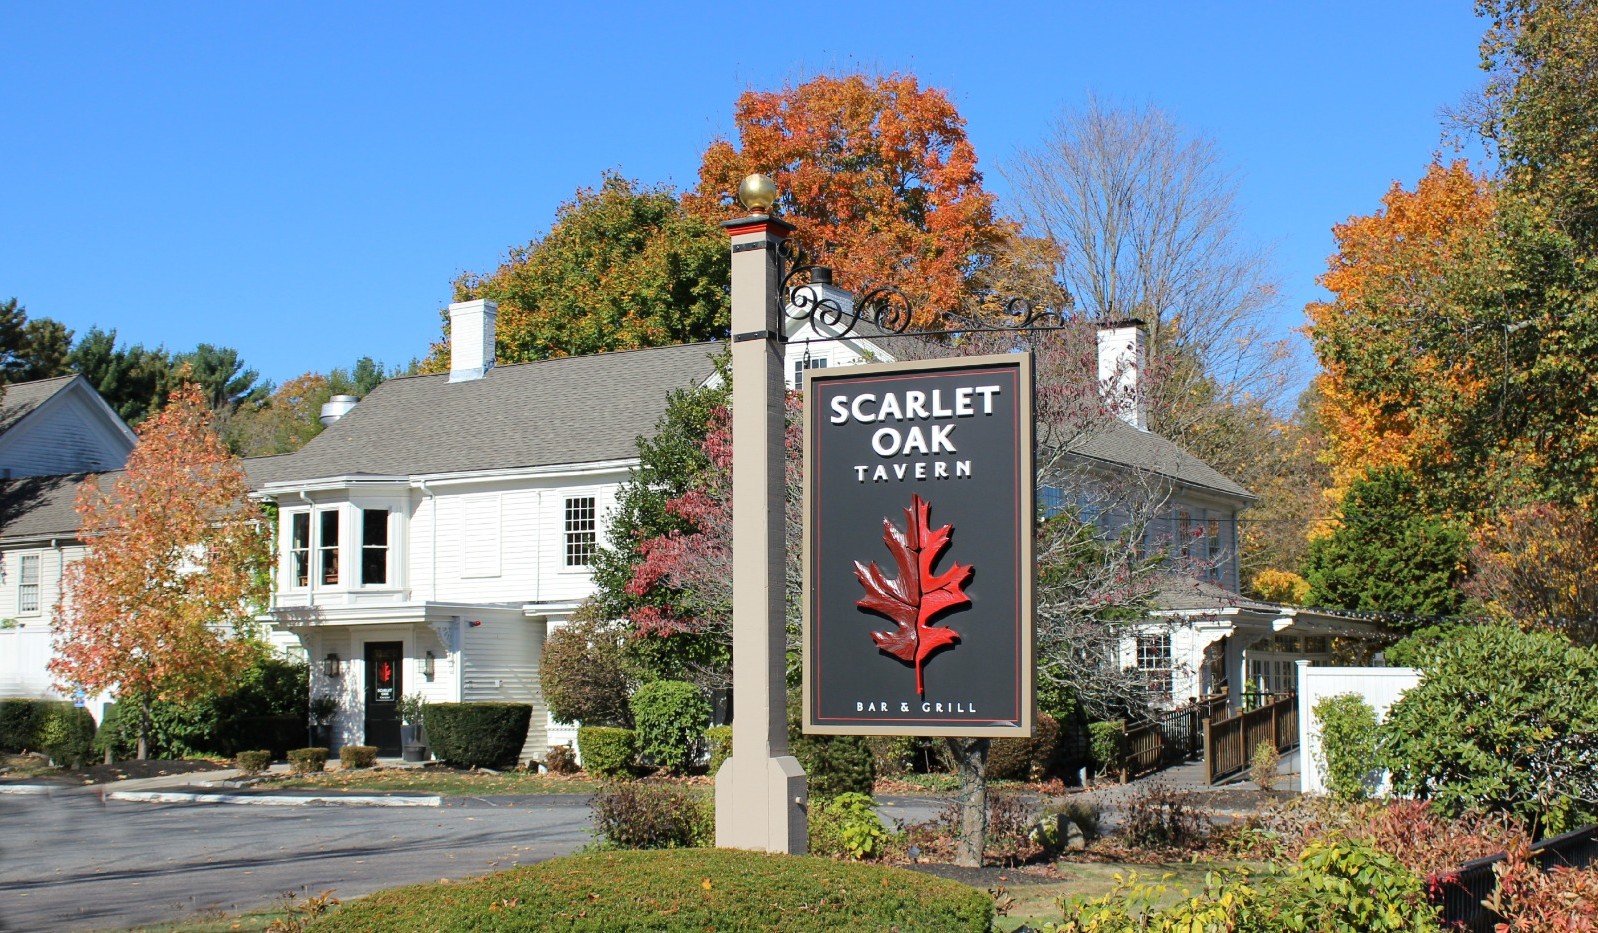 View of building from the outside with Scarlet Oak Tavern signage